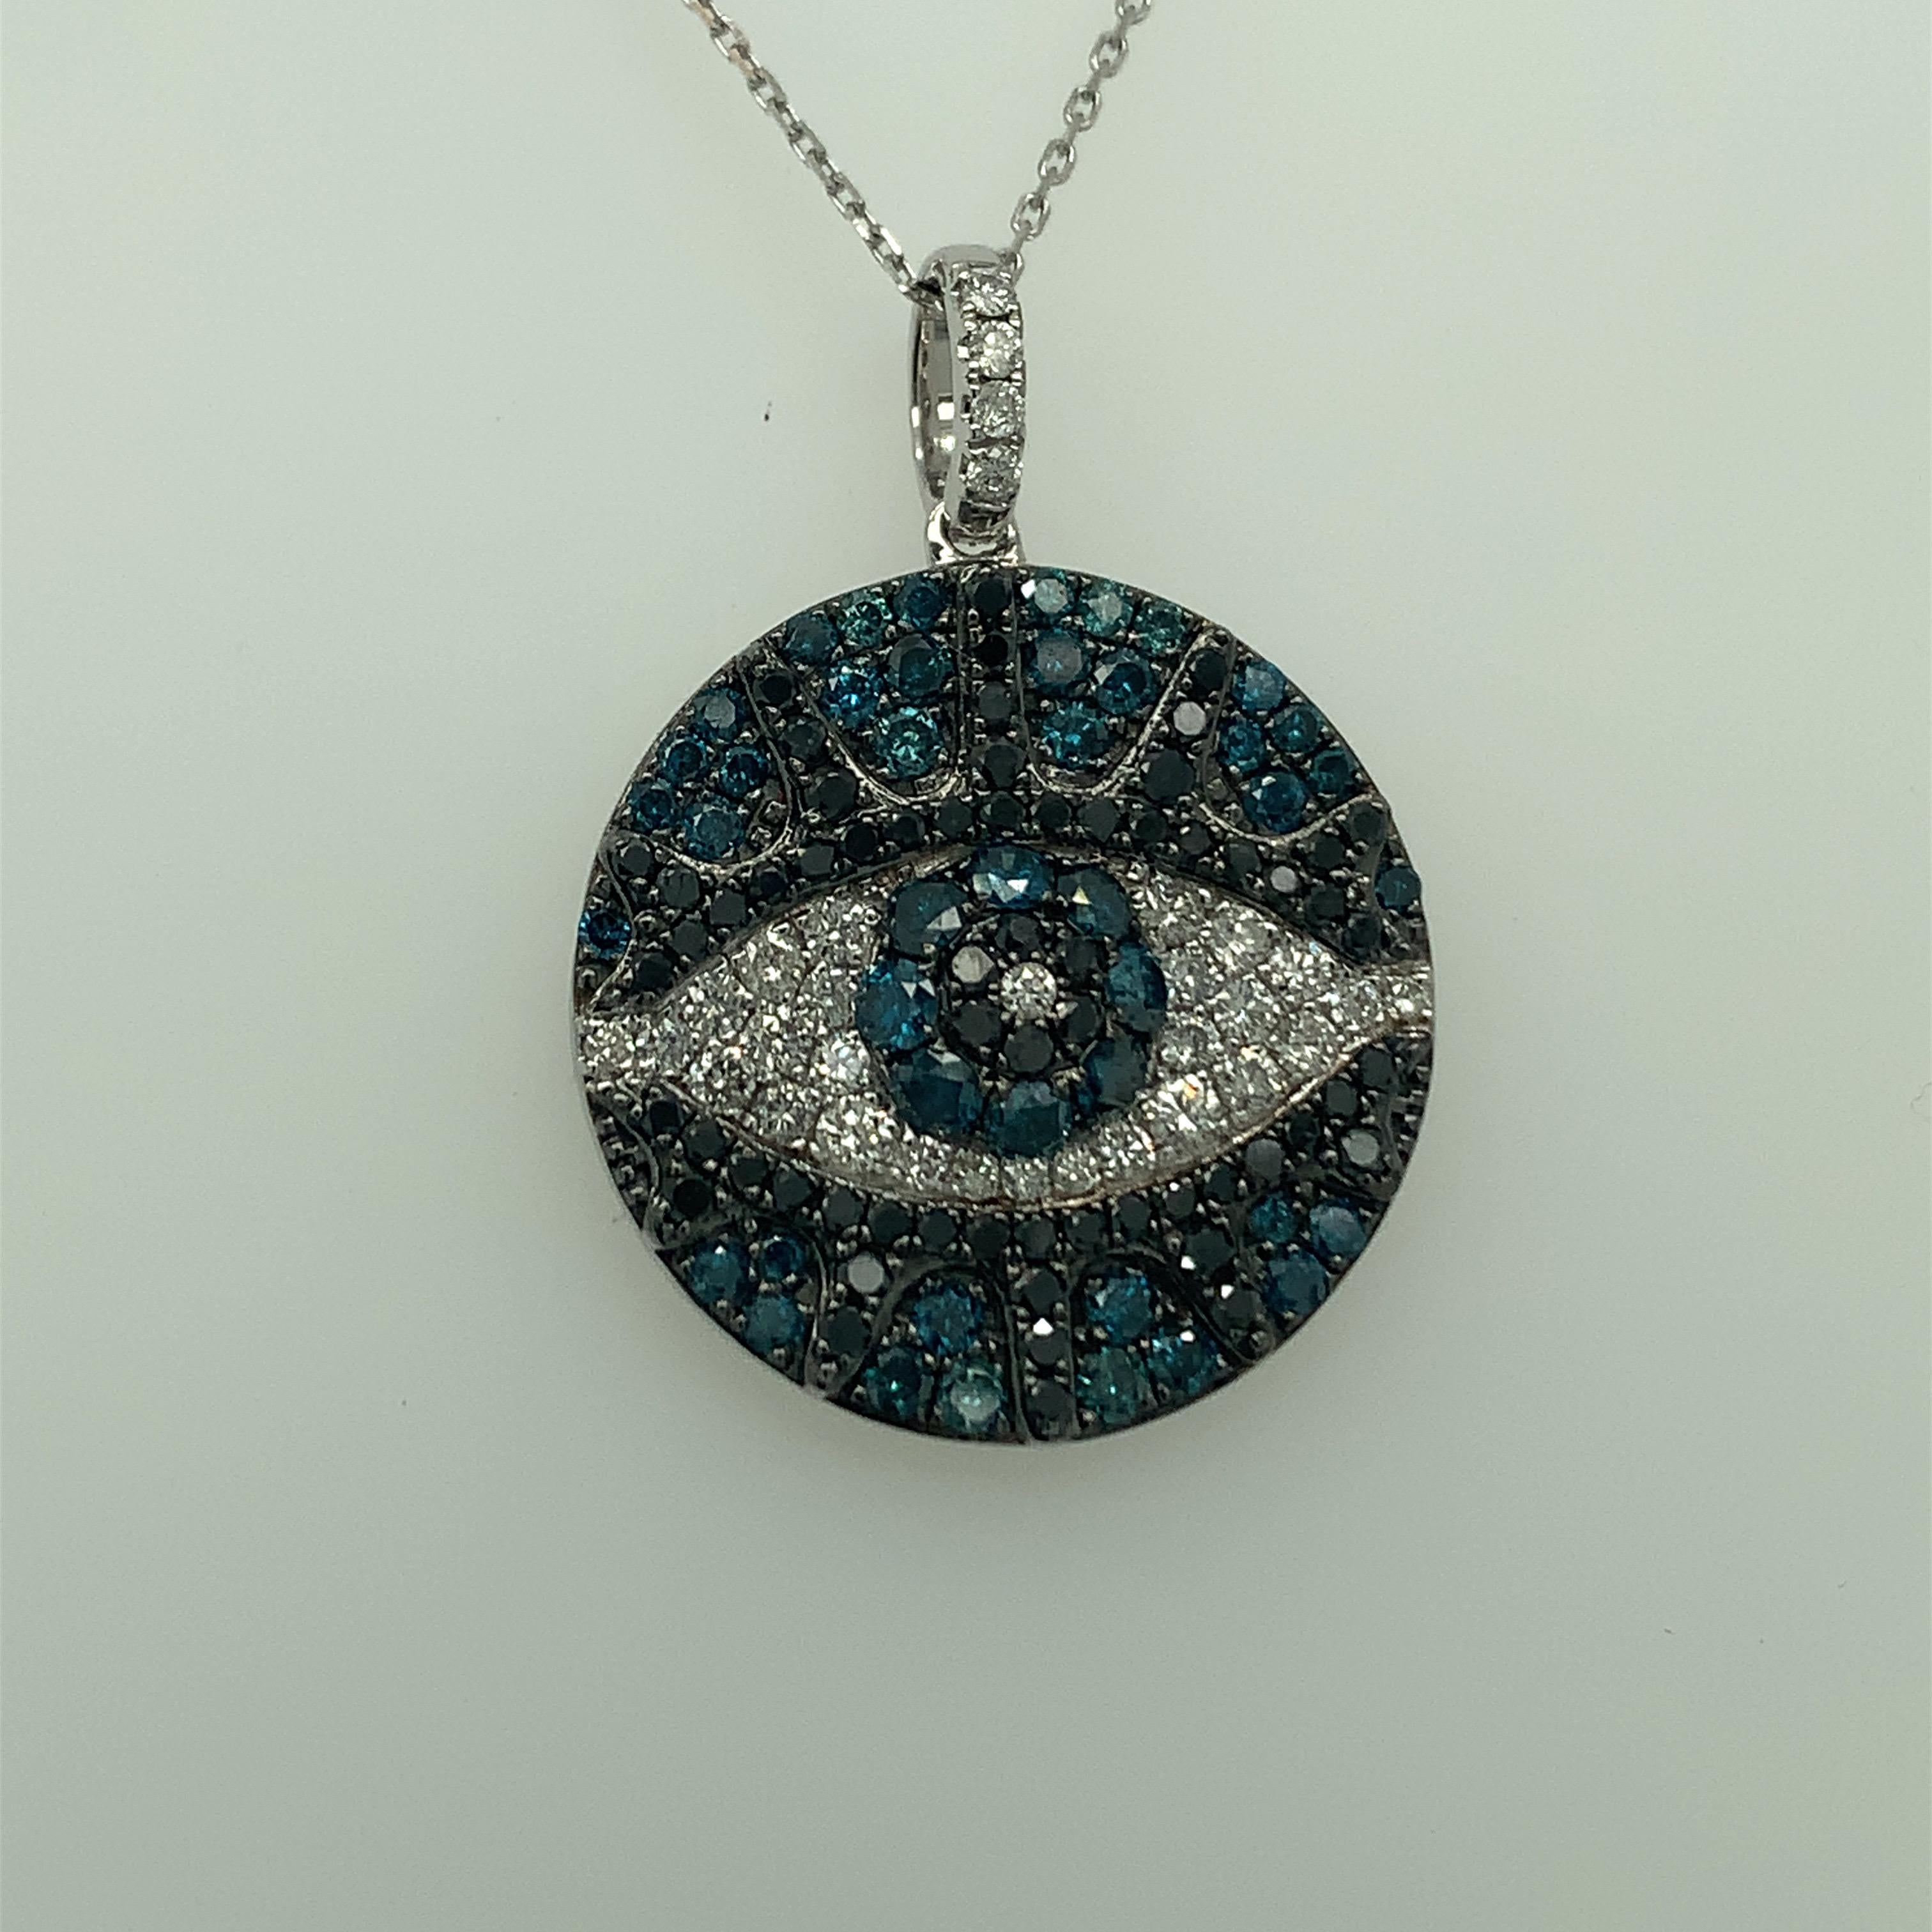 Evil eyes pendant with Earth mined natural diamonds 2.53 carat ( 193 ) pcs set in 18K White gold is one of a kind pendant with chain.

Evil eyes pendant wearing provides the wearer both power and protection against evil spirits and bad luck.

40% of